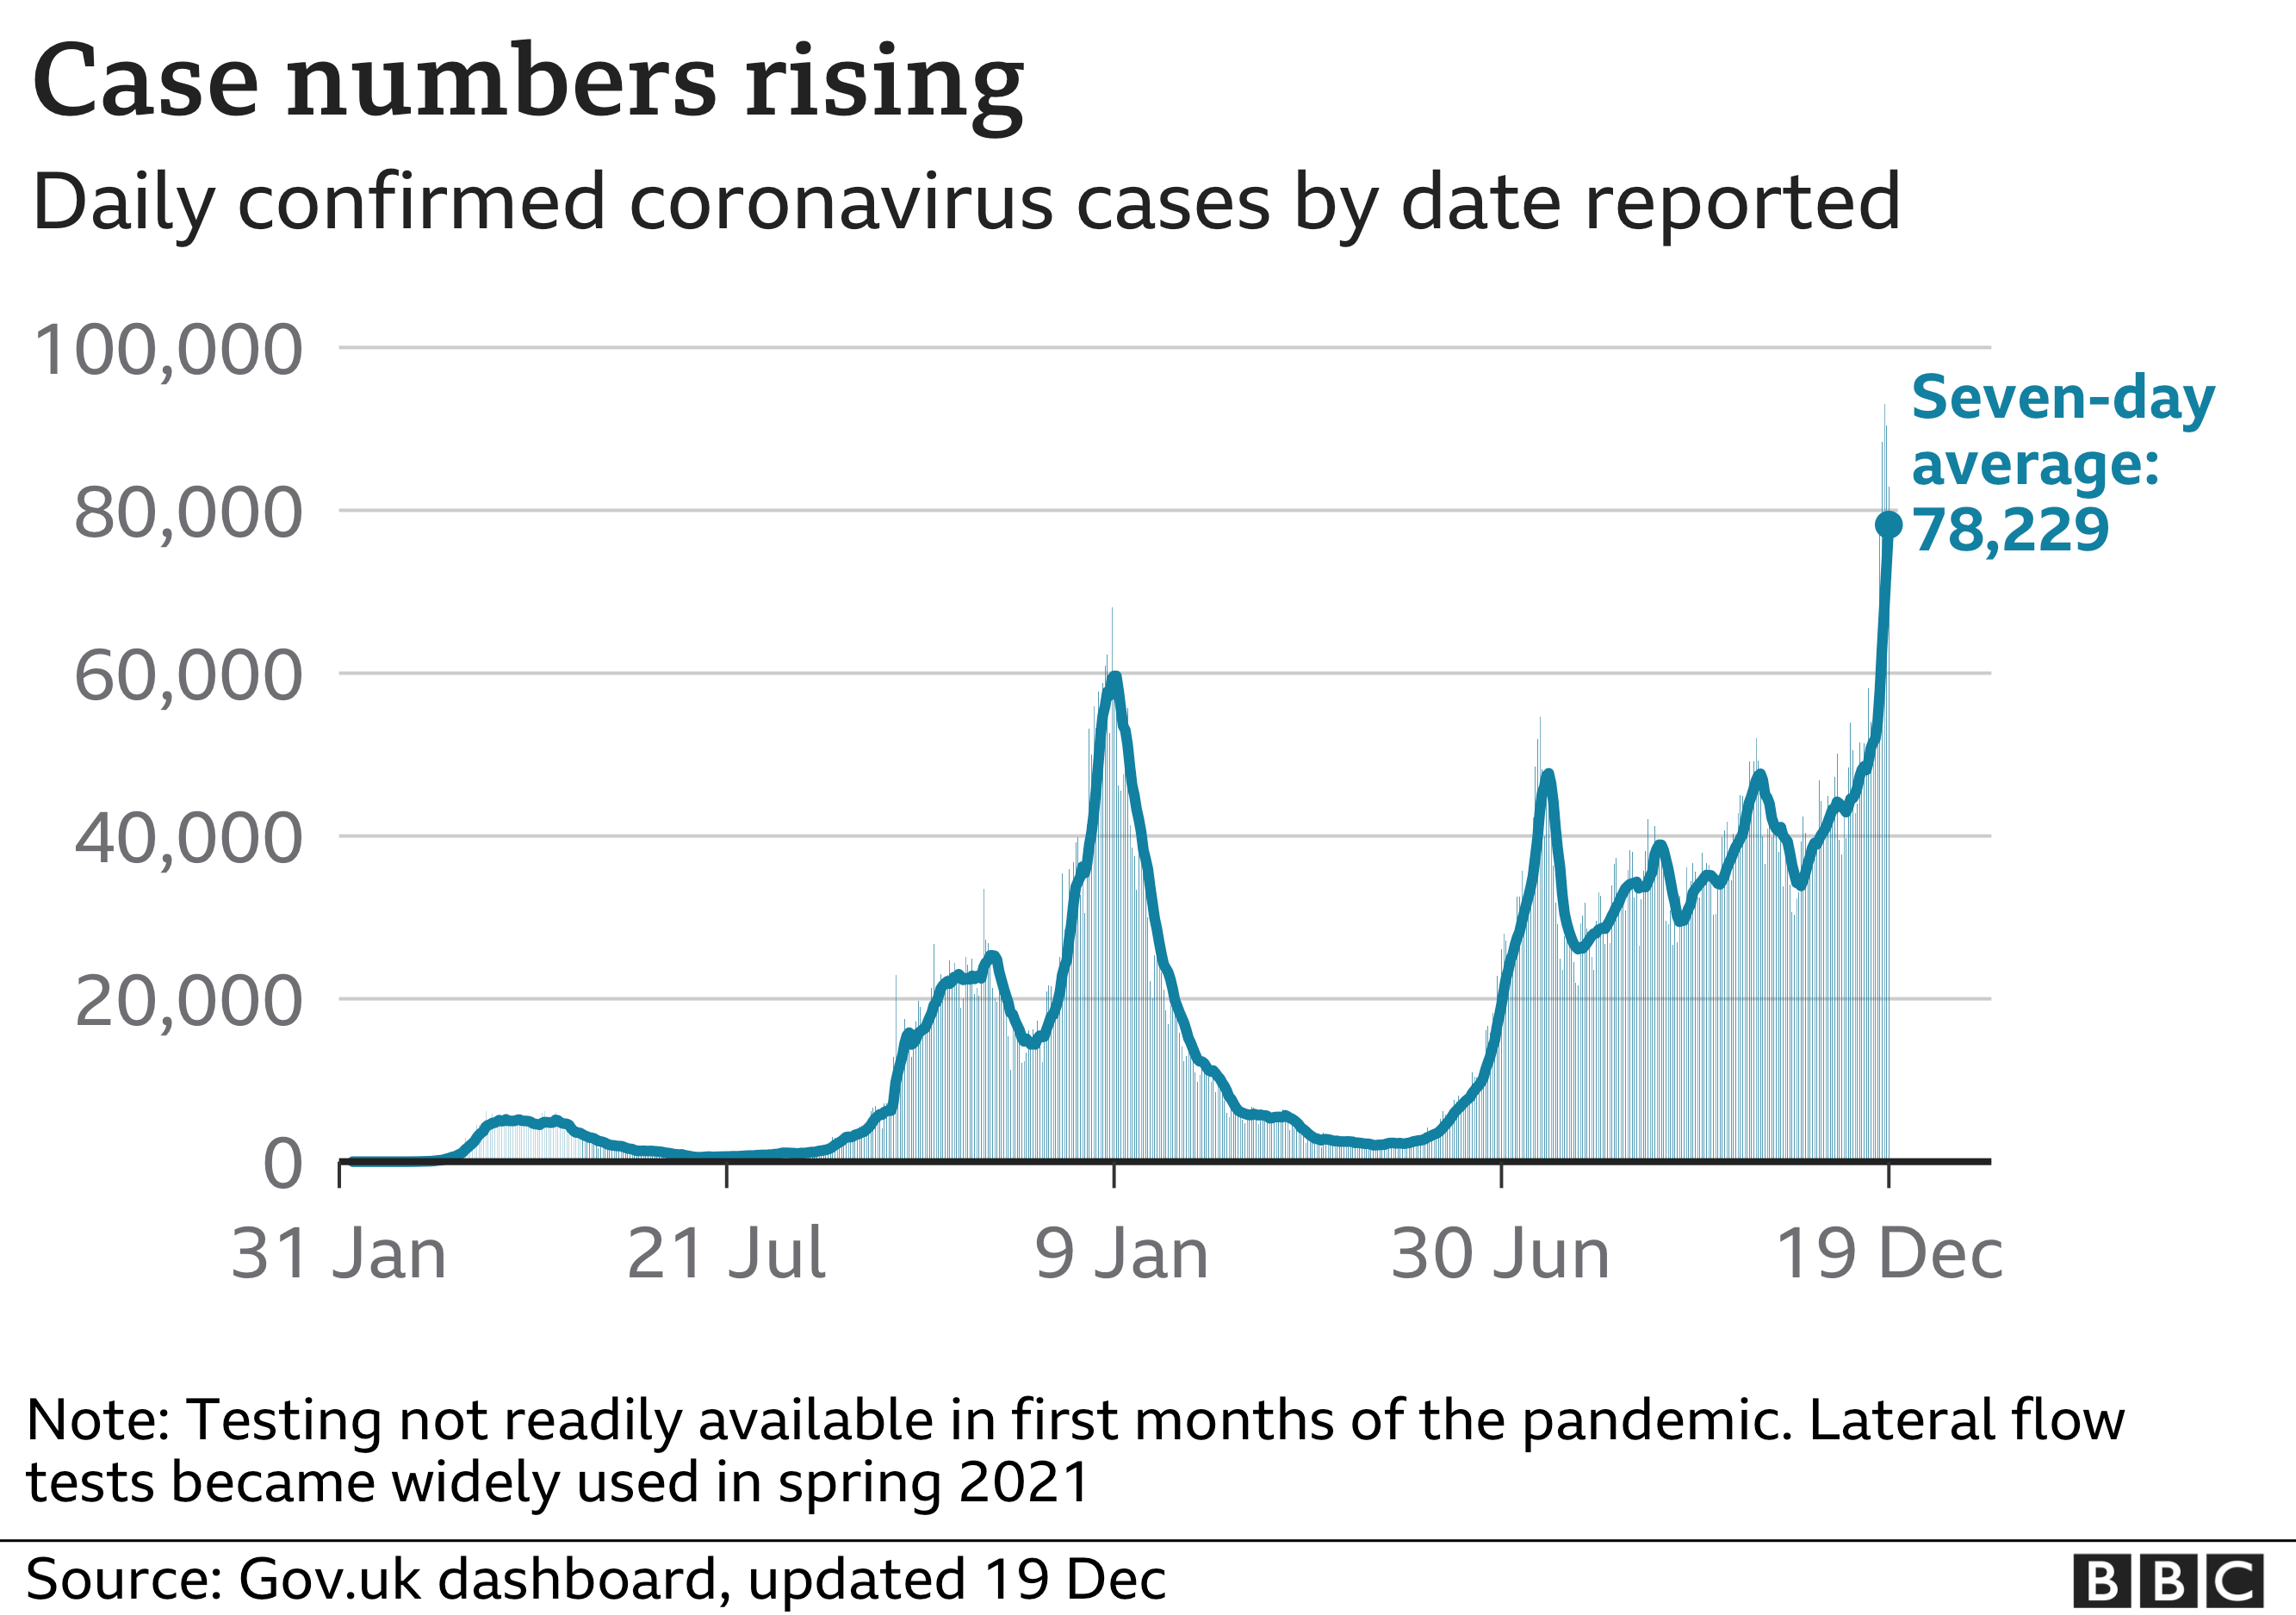 Cases are rising